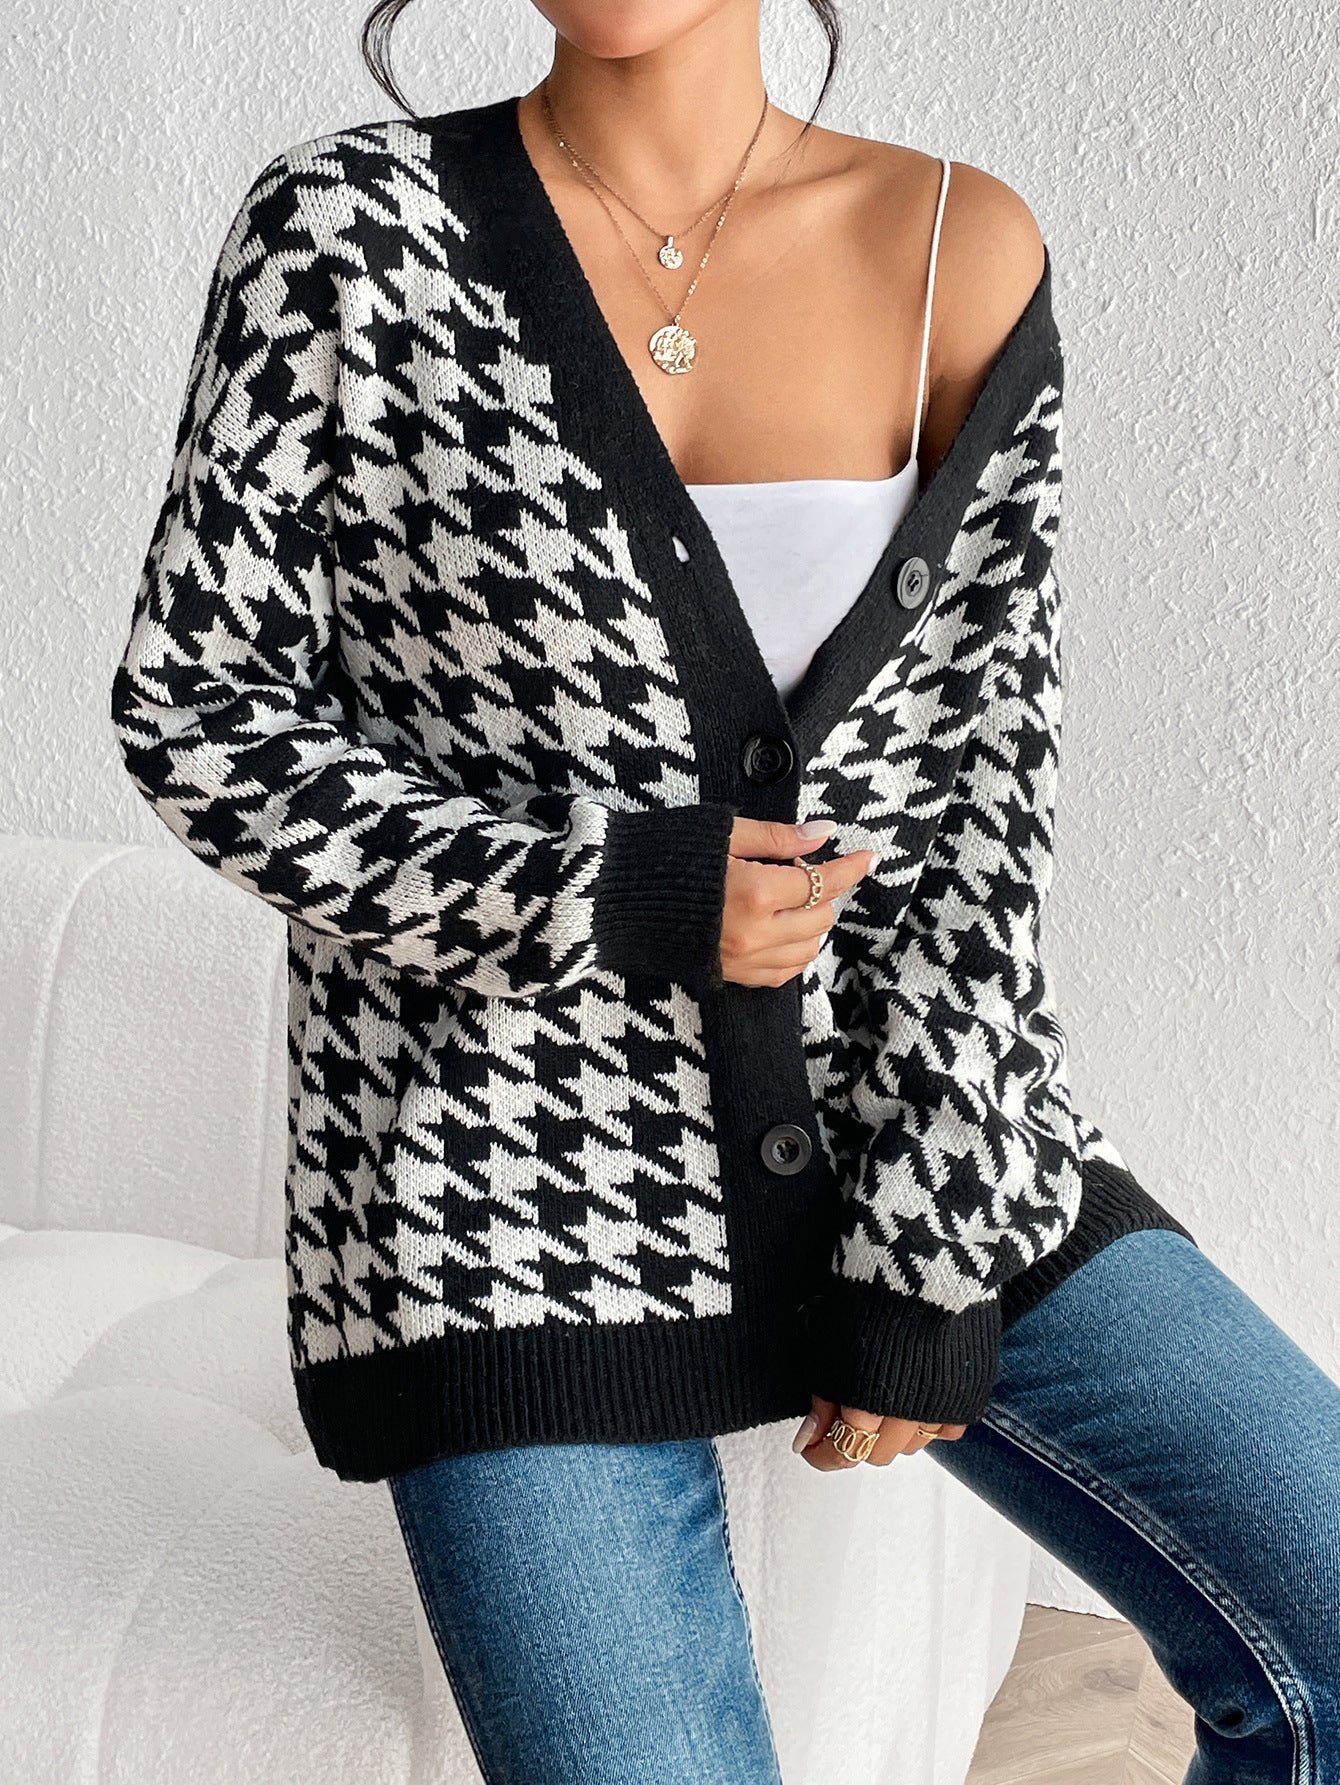 Autumn Winter Contrast Color Houndstooth Cardigan Coat Knitted Sweater